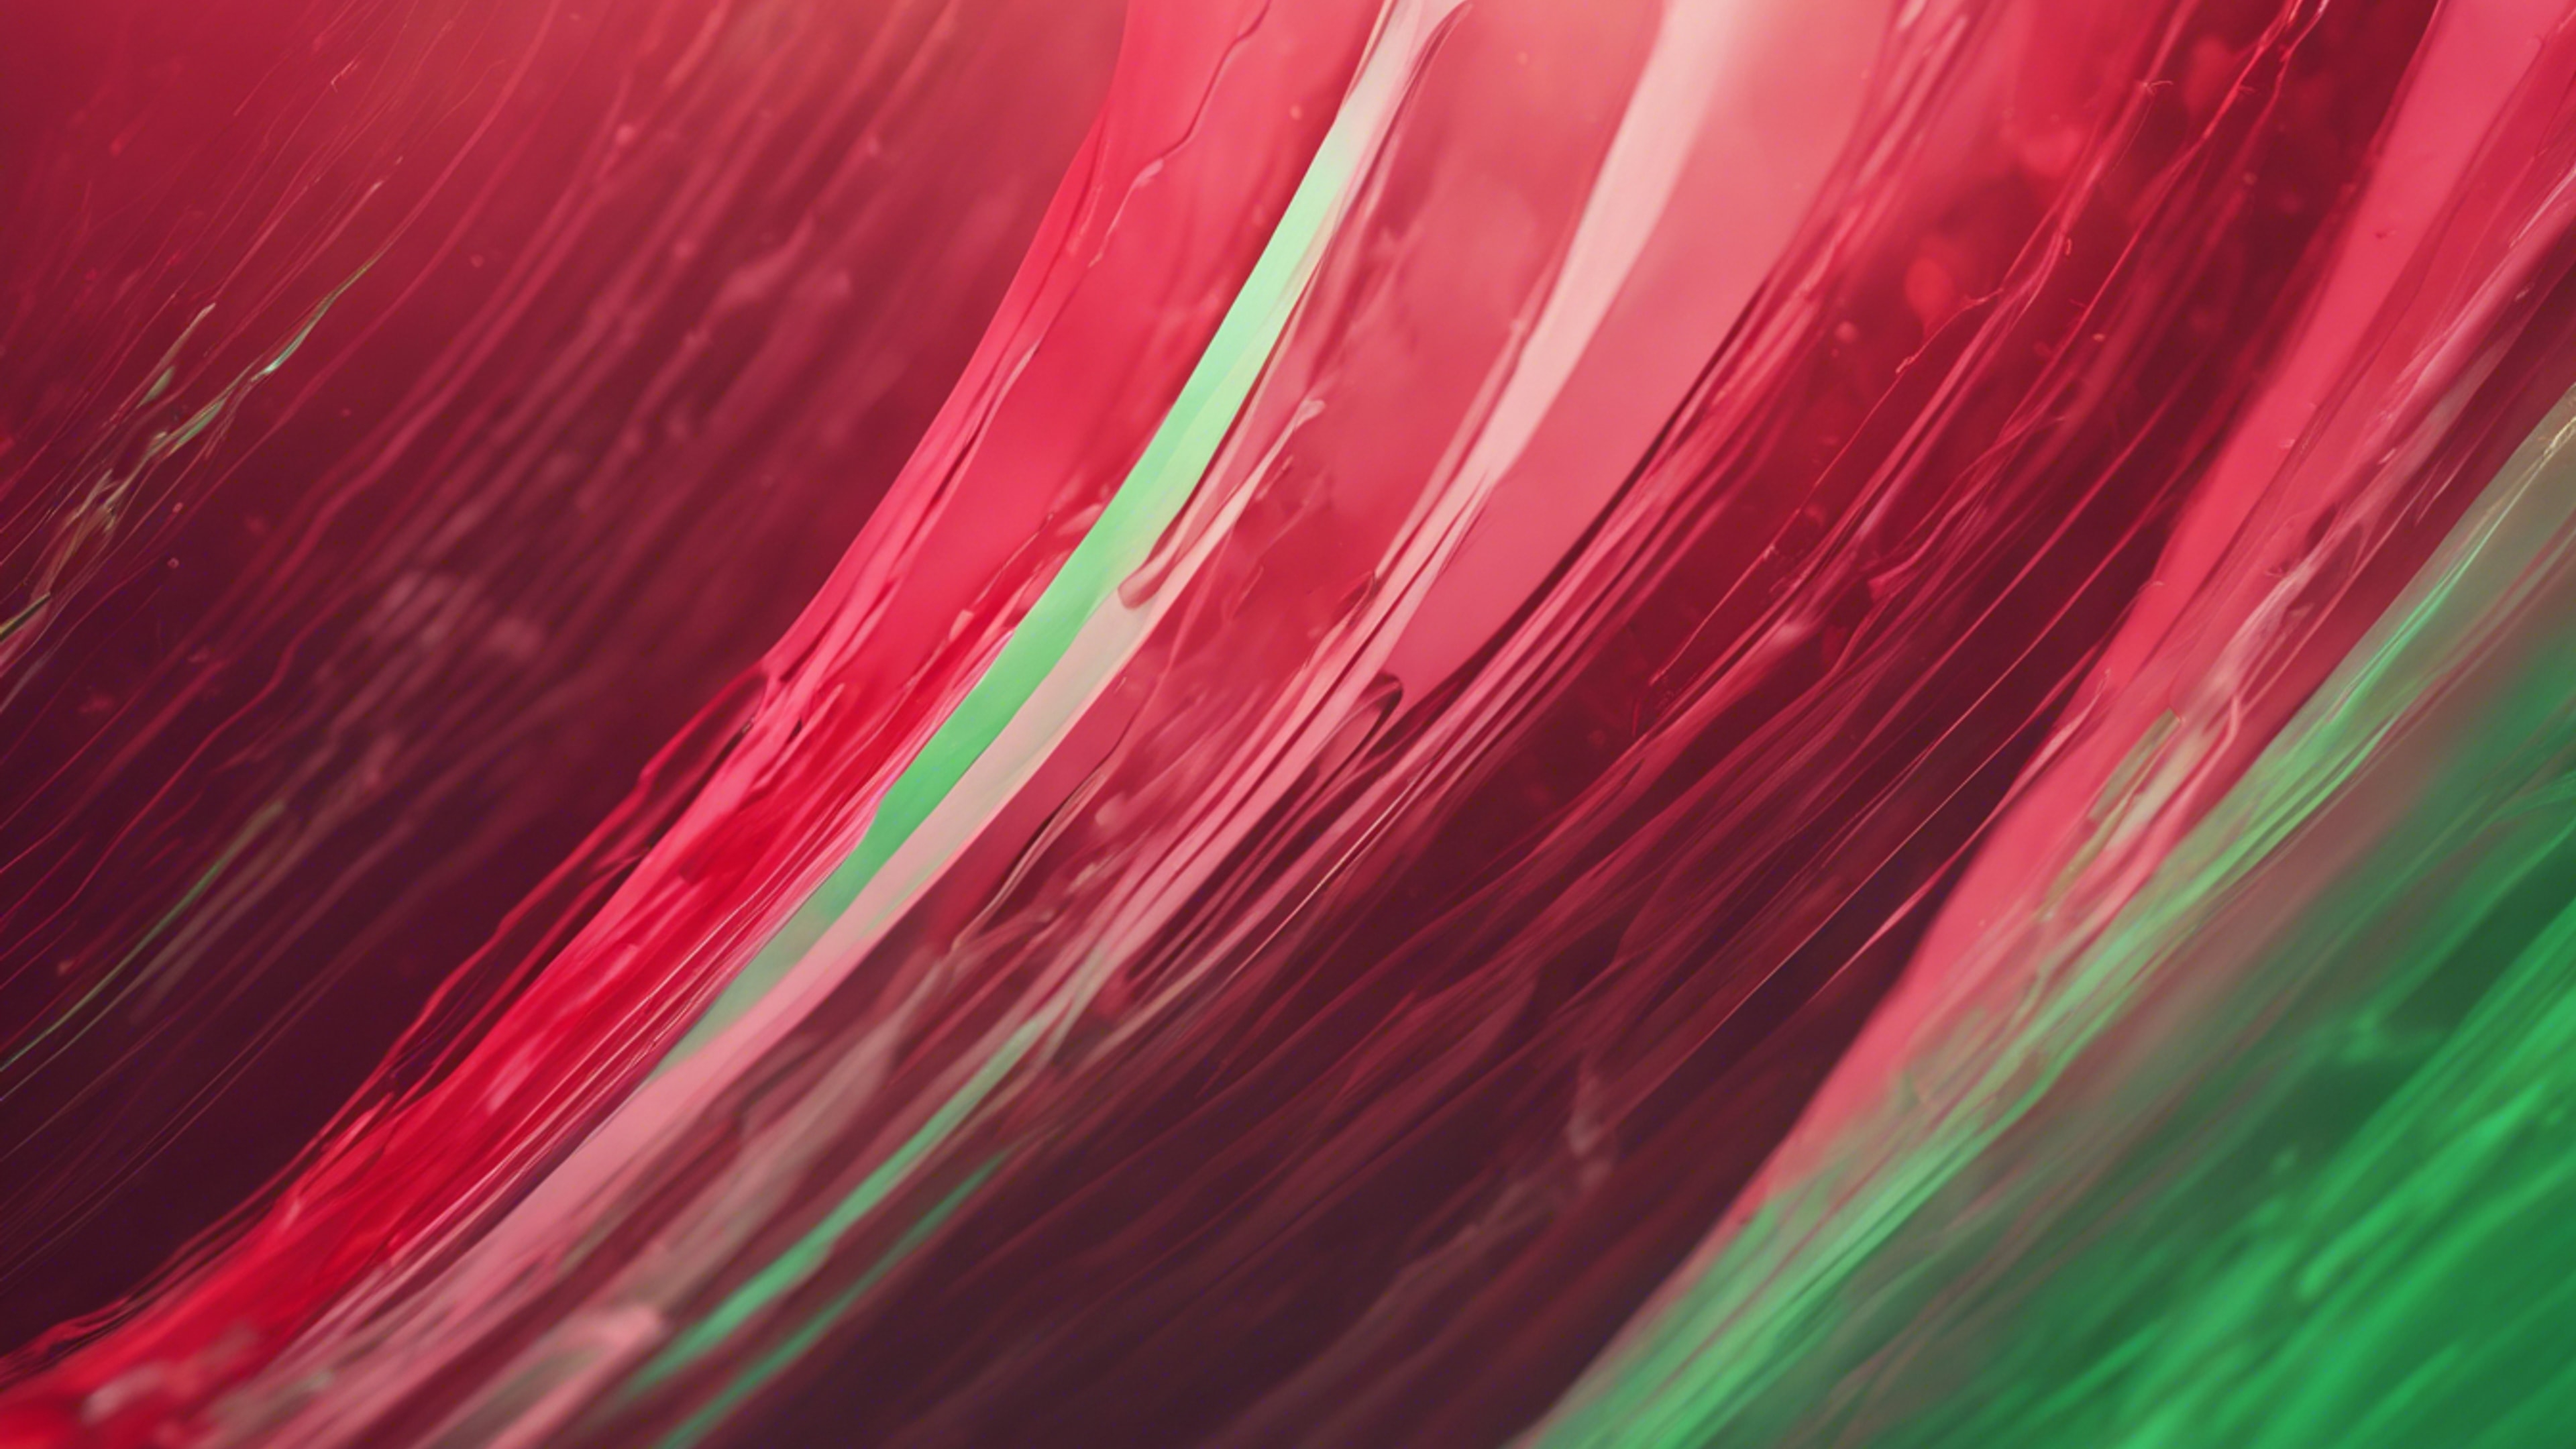 Smooth red and green gradients merging harmoniously in an abstract composition壁紙[1ddc14c50c534910ac9c]